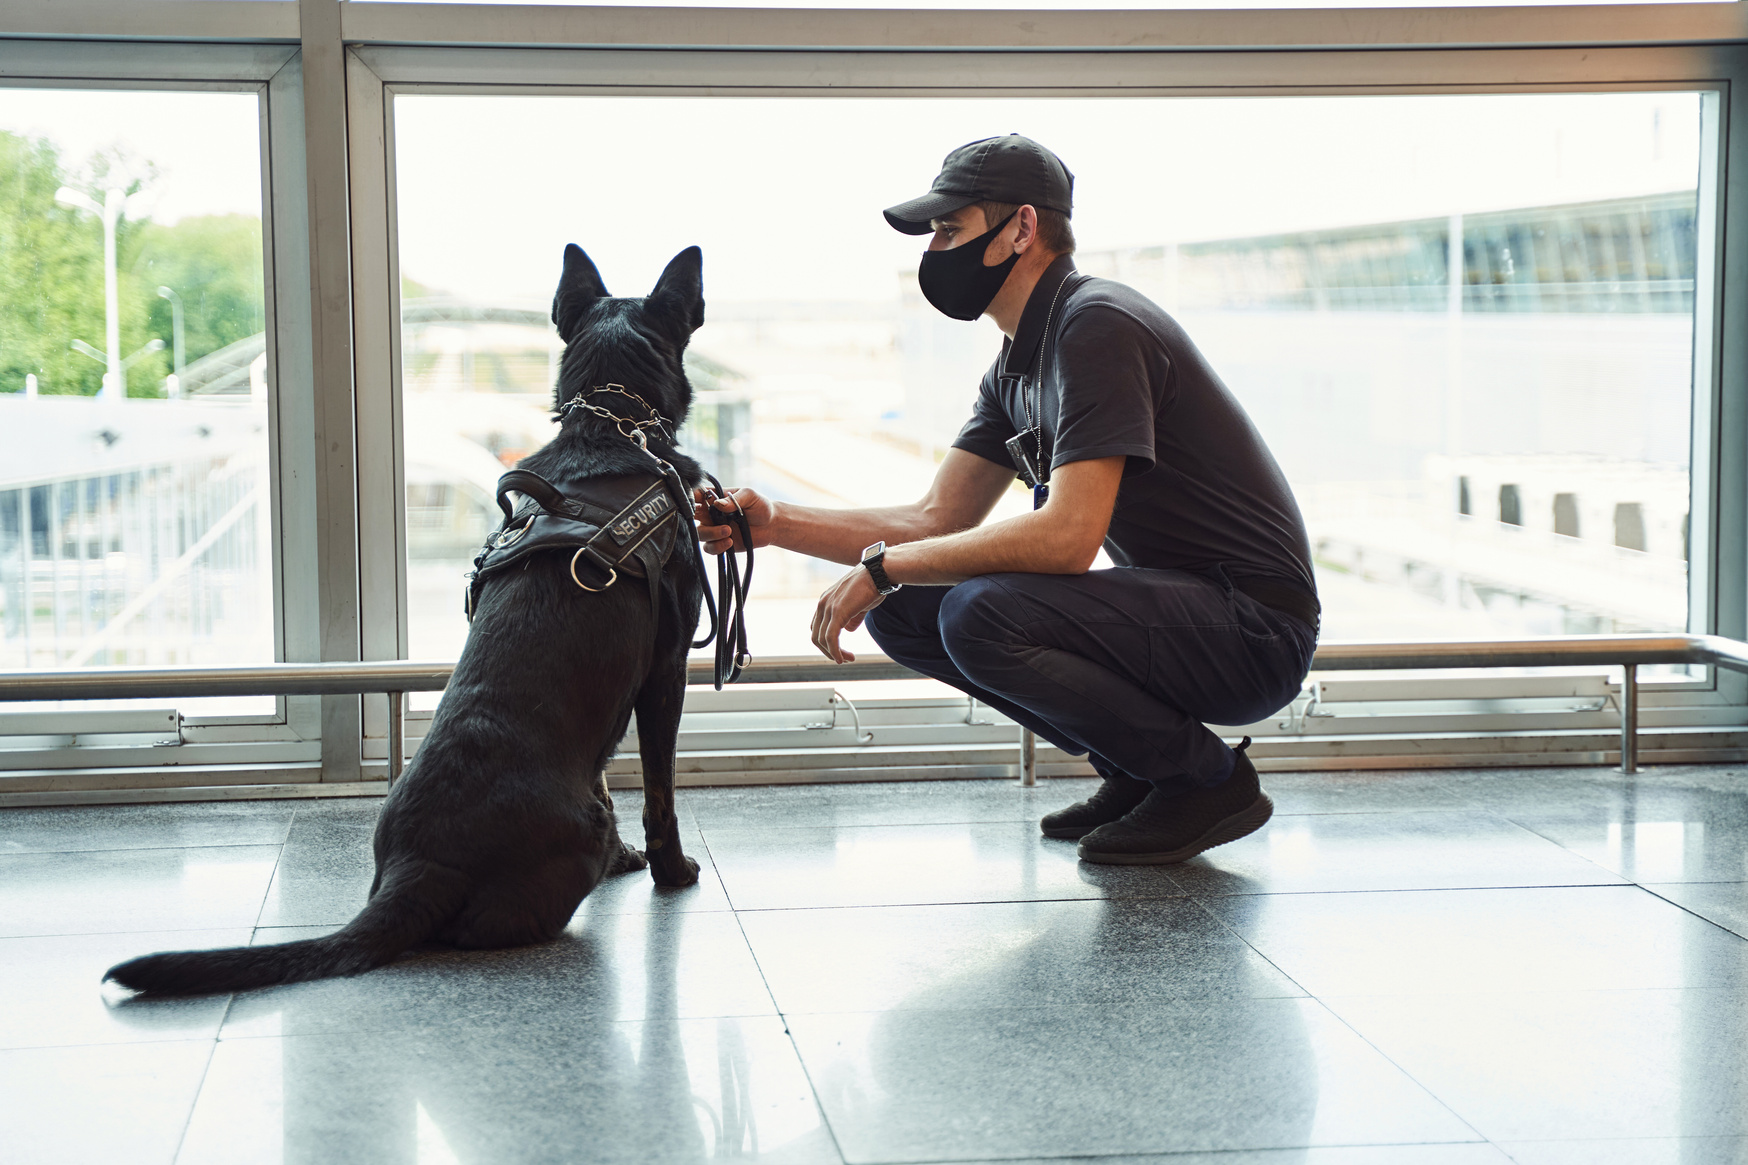 Security officer with detection dog patrolling airport terminal